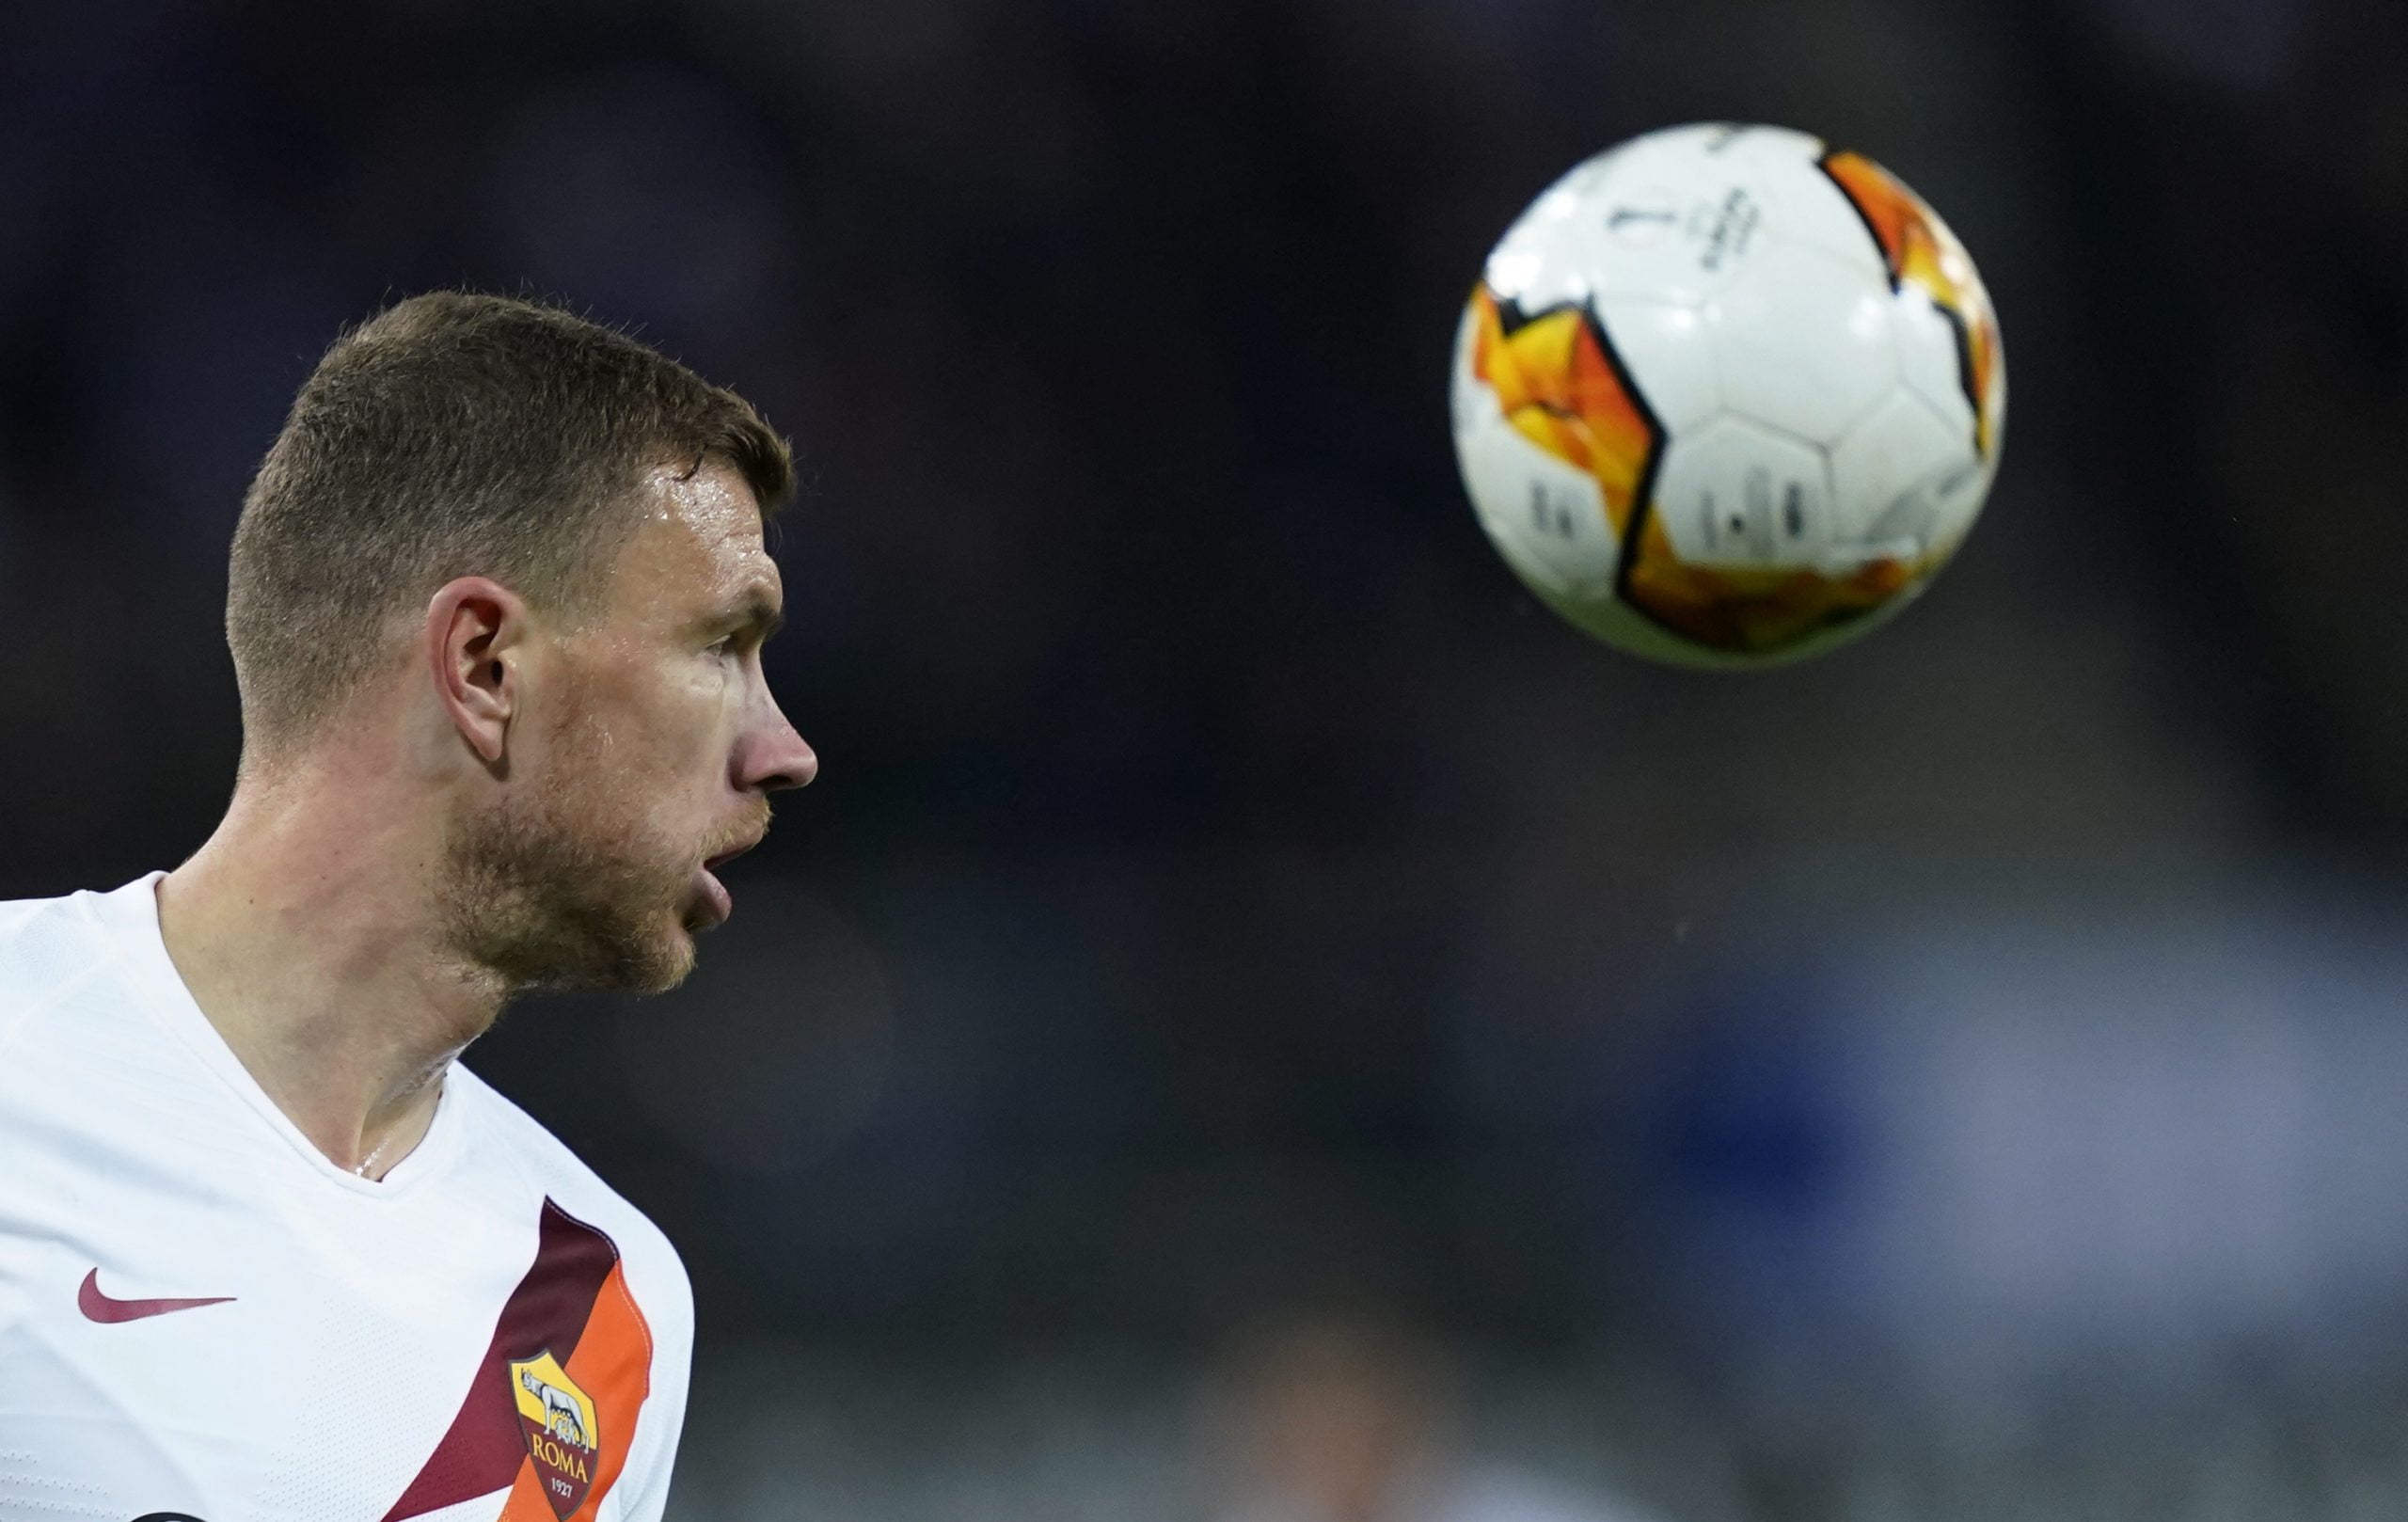 Southampton reportedly launched an offer for Dzeko who is seen in the photo